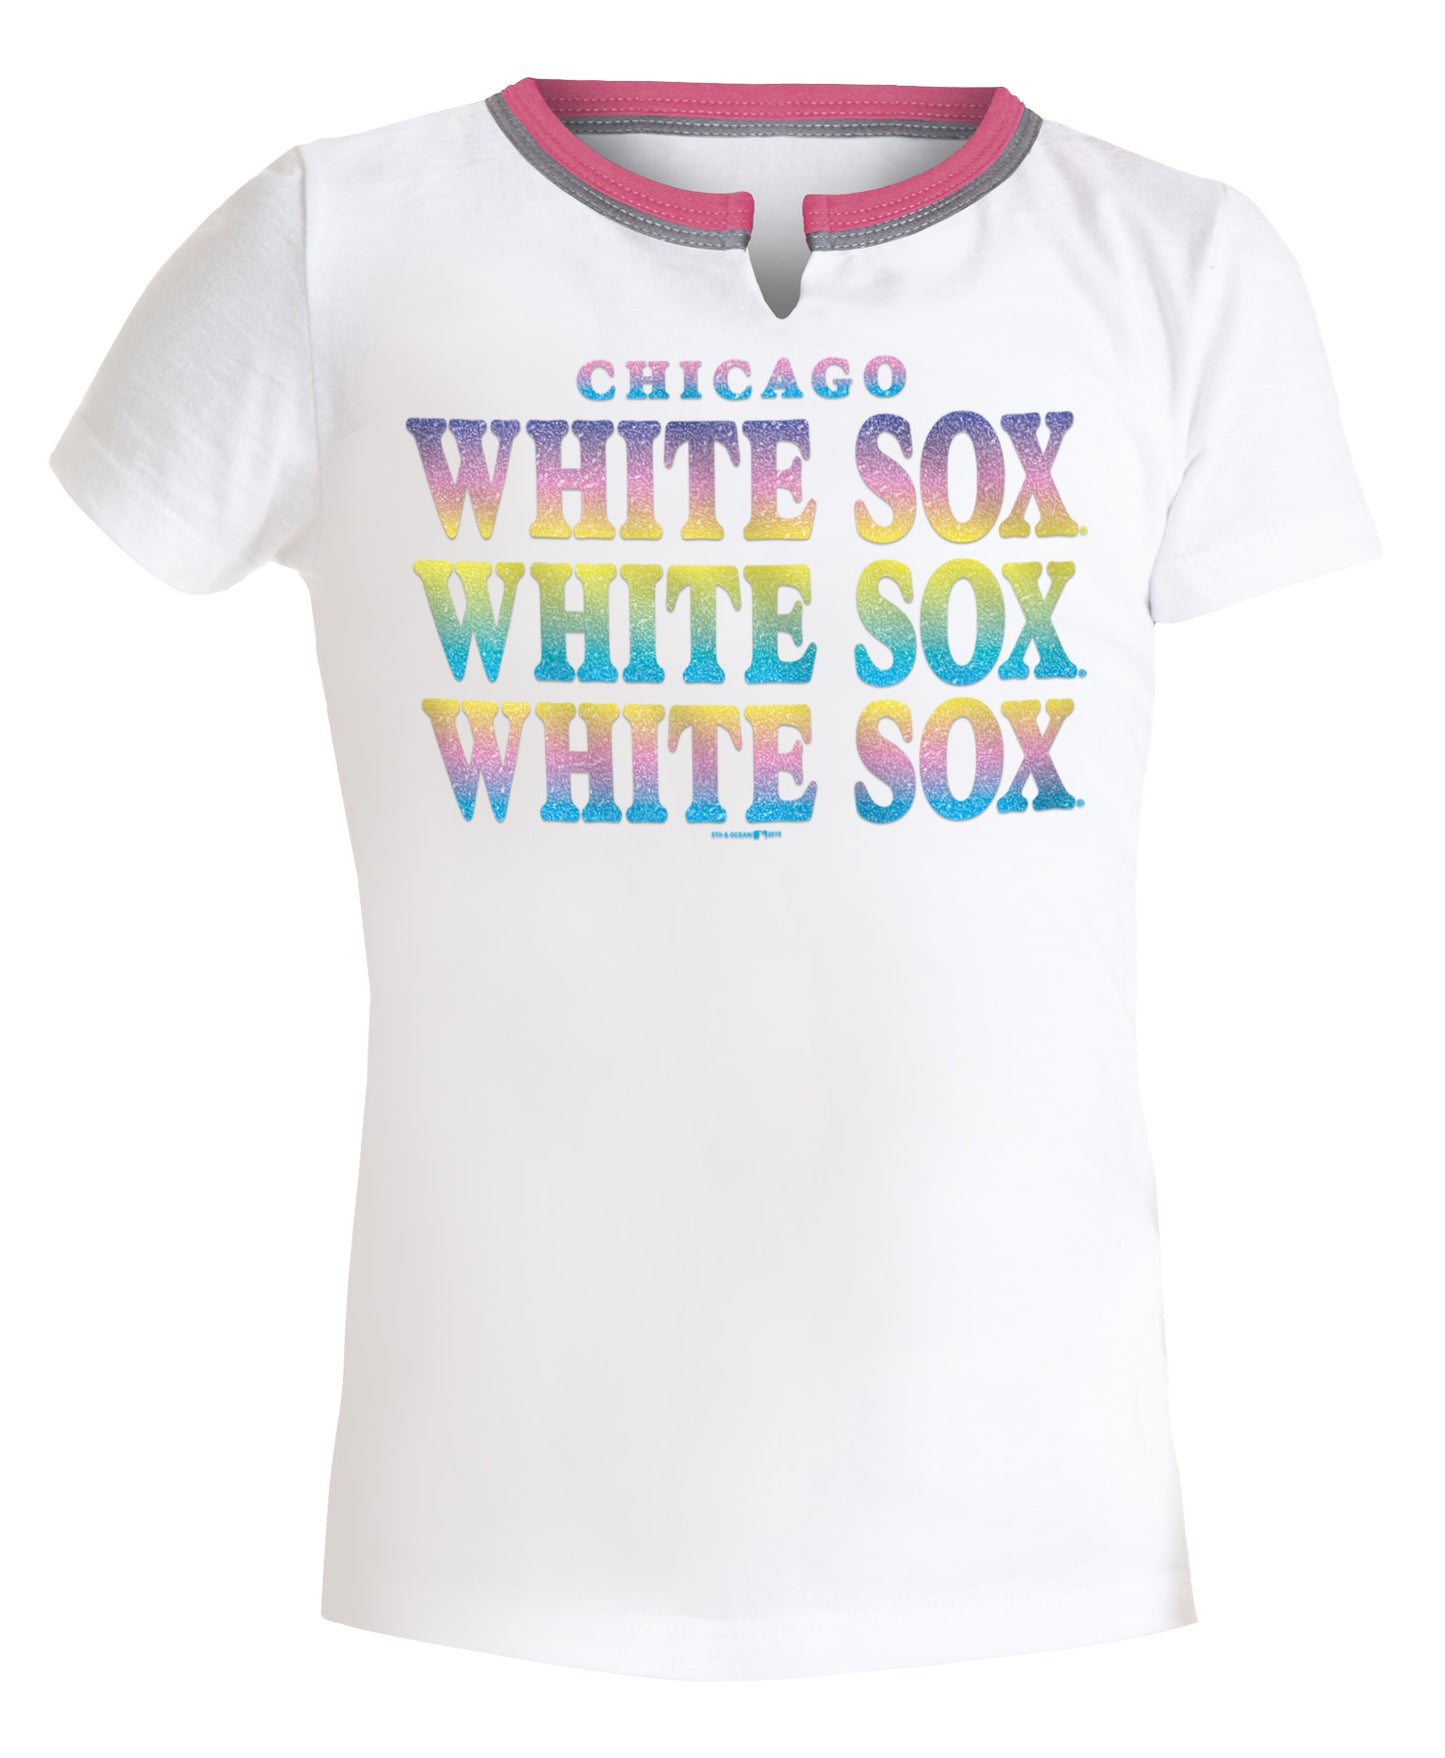 Chicago White Sox Youth Multicolor Split Scoop w/ Iridescent Glitter Tee